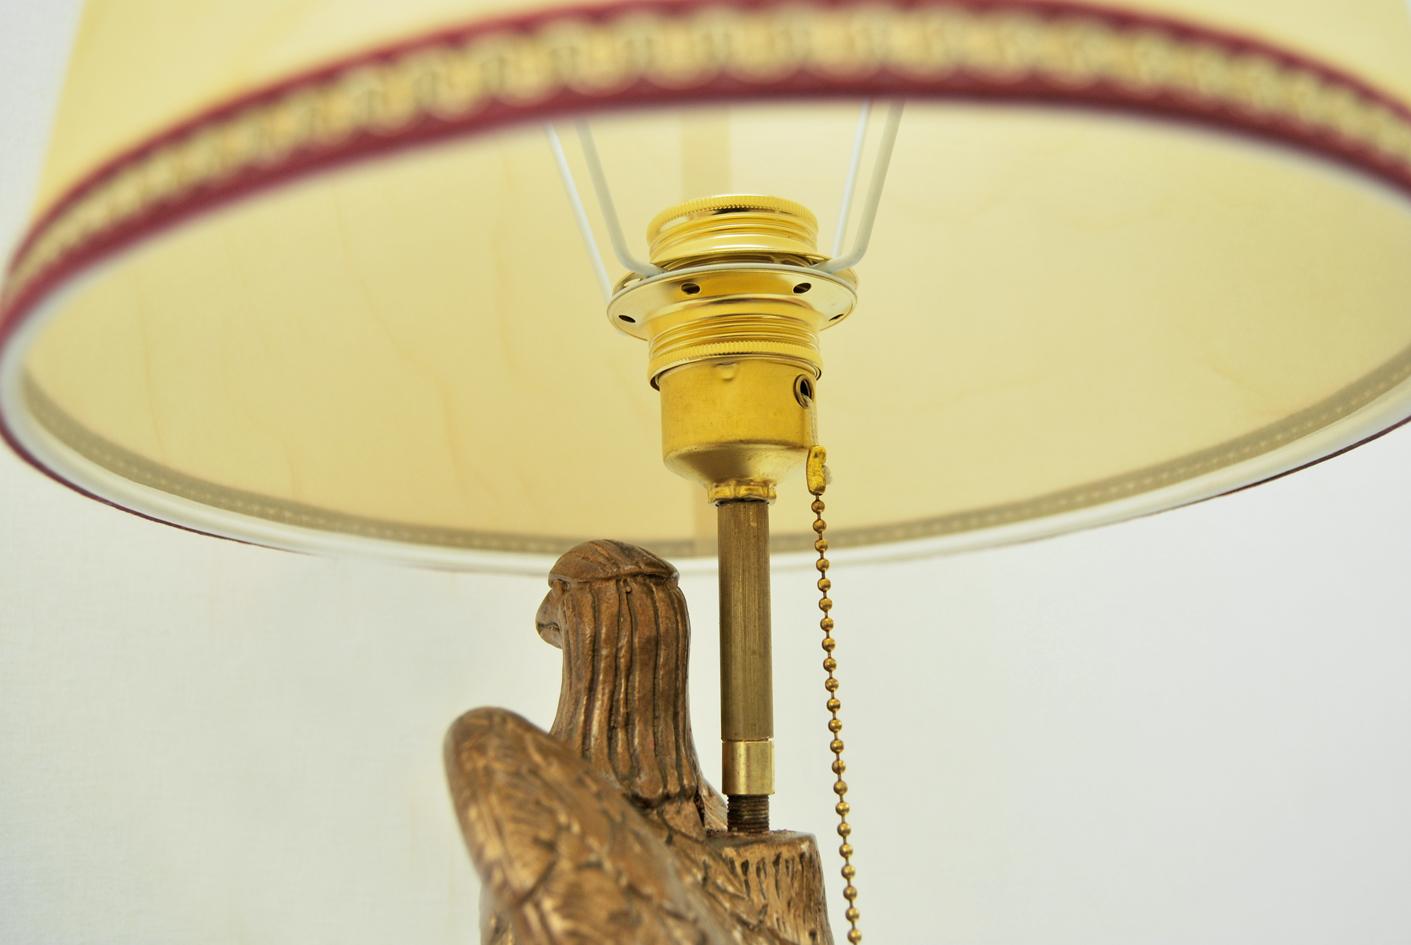 Very rare German table lamp from the 1940s
This beautiful lamp comes from Germany and dates back to World War II.
The lacquered wooden column, is topped by the eagle made  in gilded marble powder; the whole rests on a brass base. 
Restored item, is